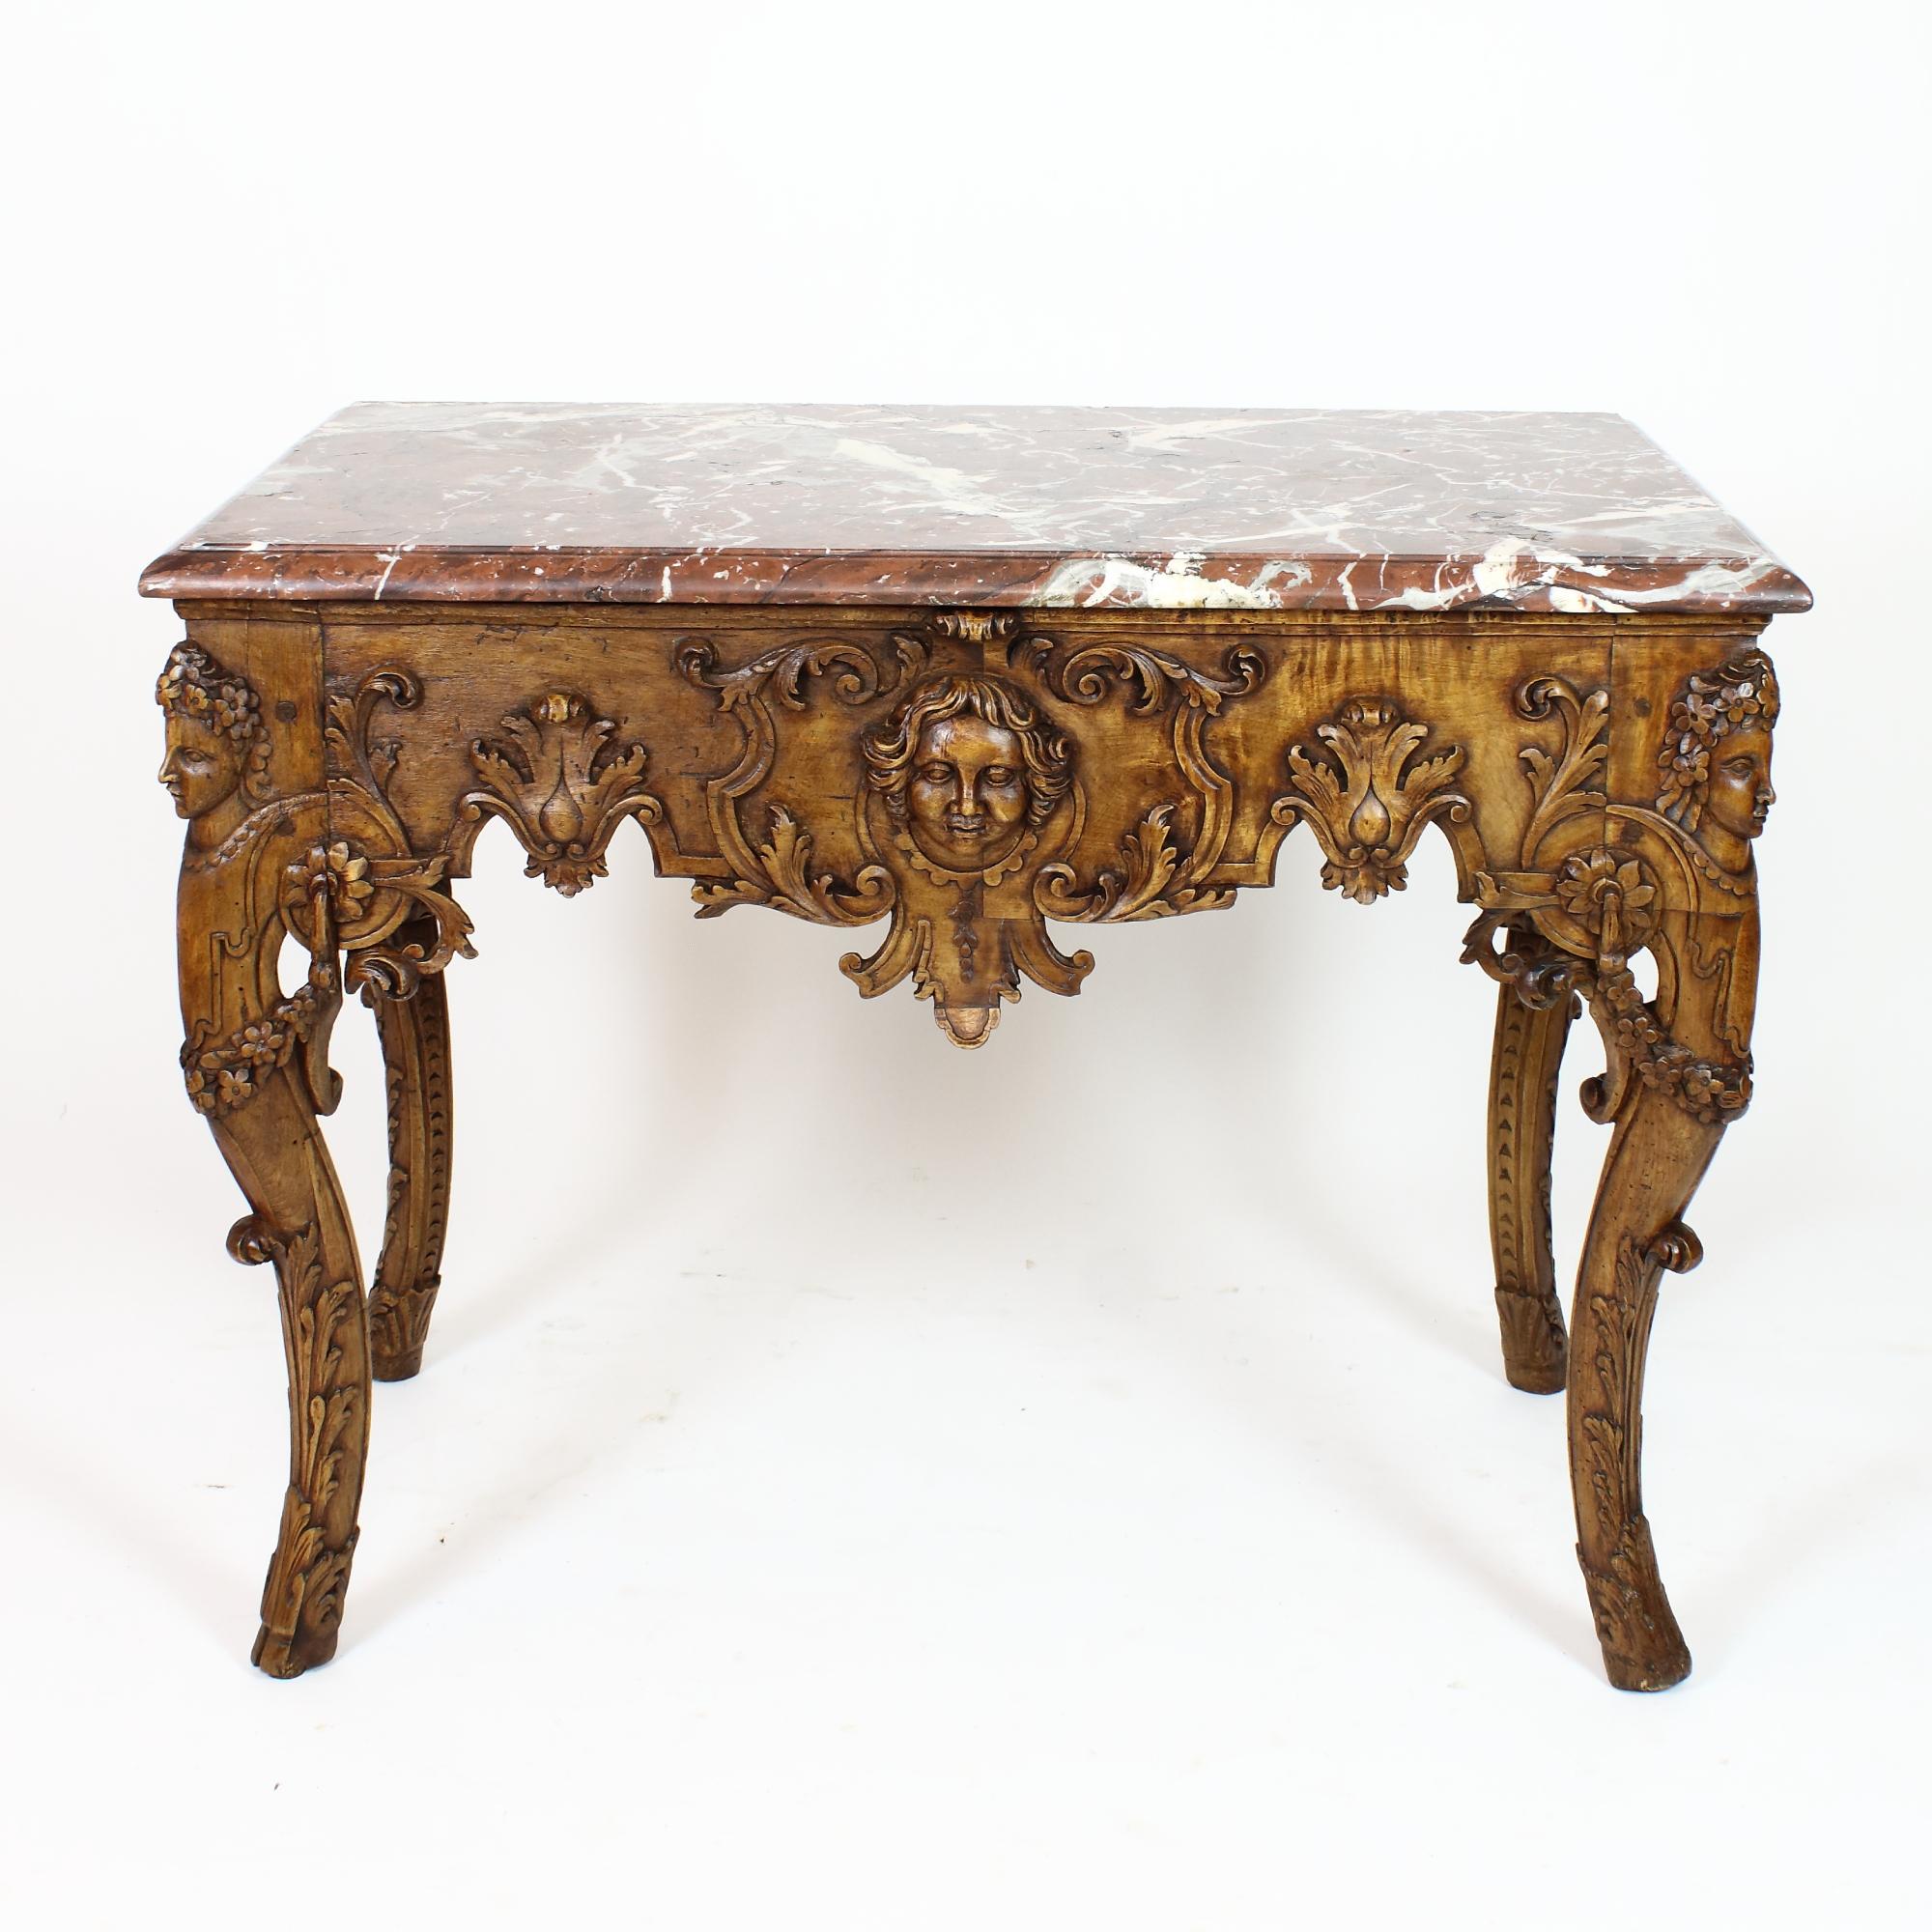 Early 18th Century Louis XIV figural Carved Wood Console Table or 